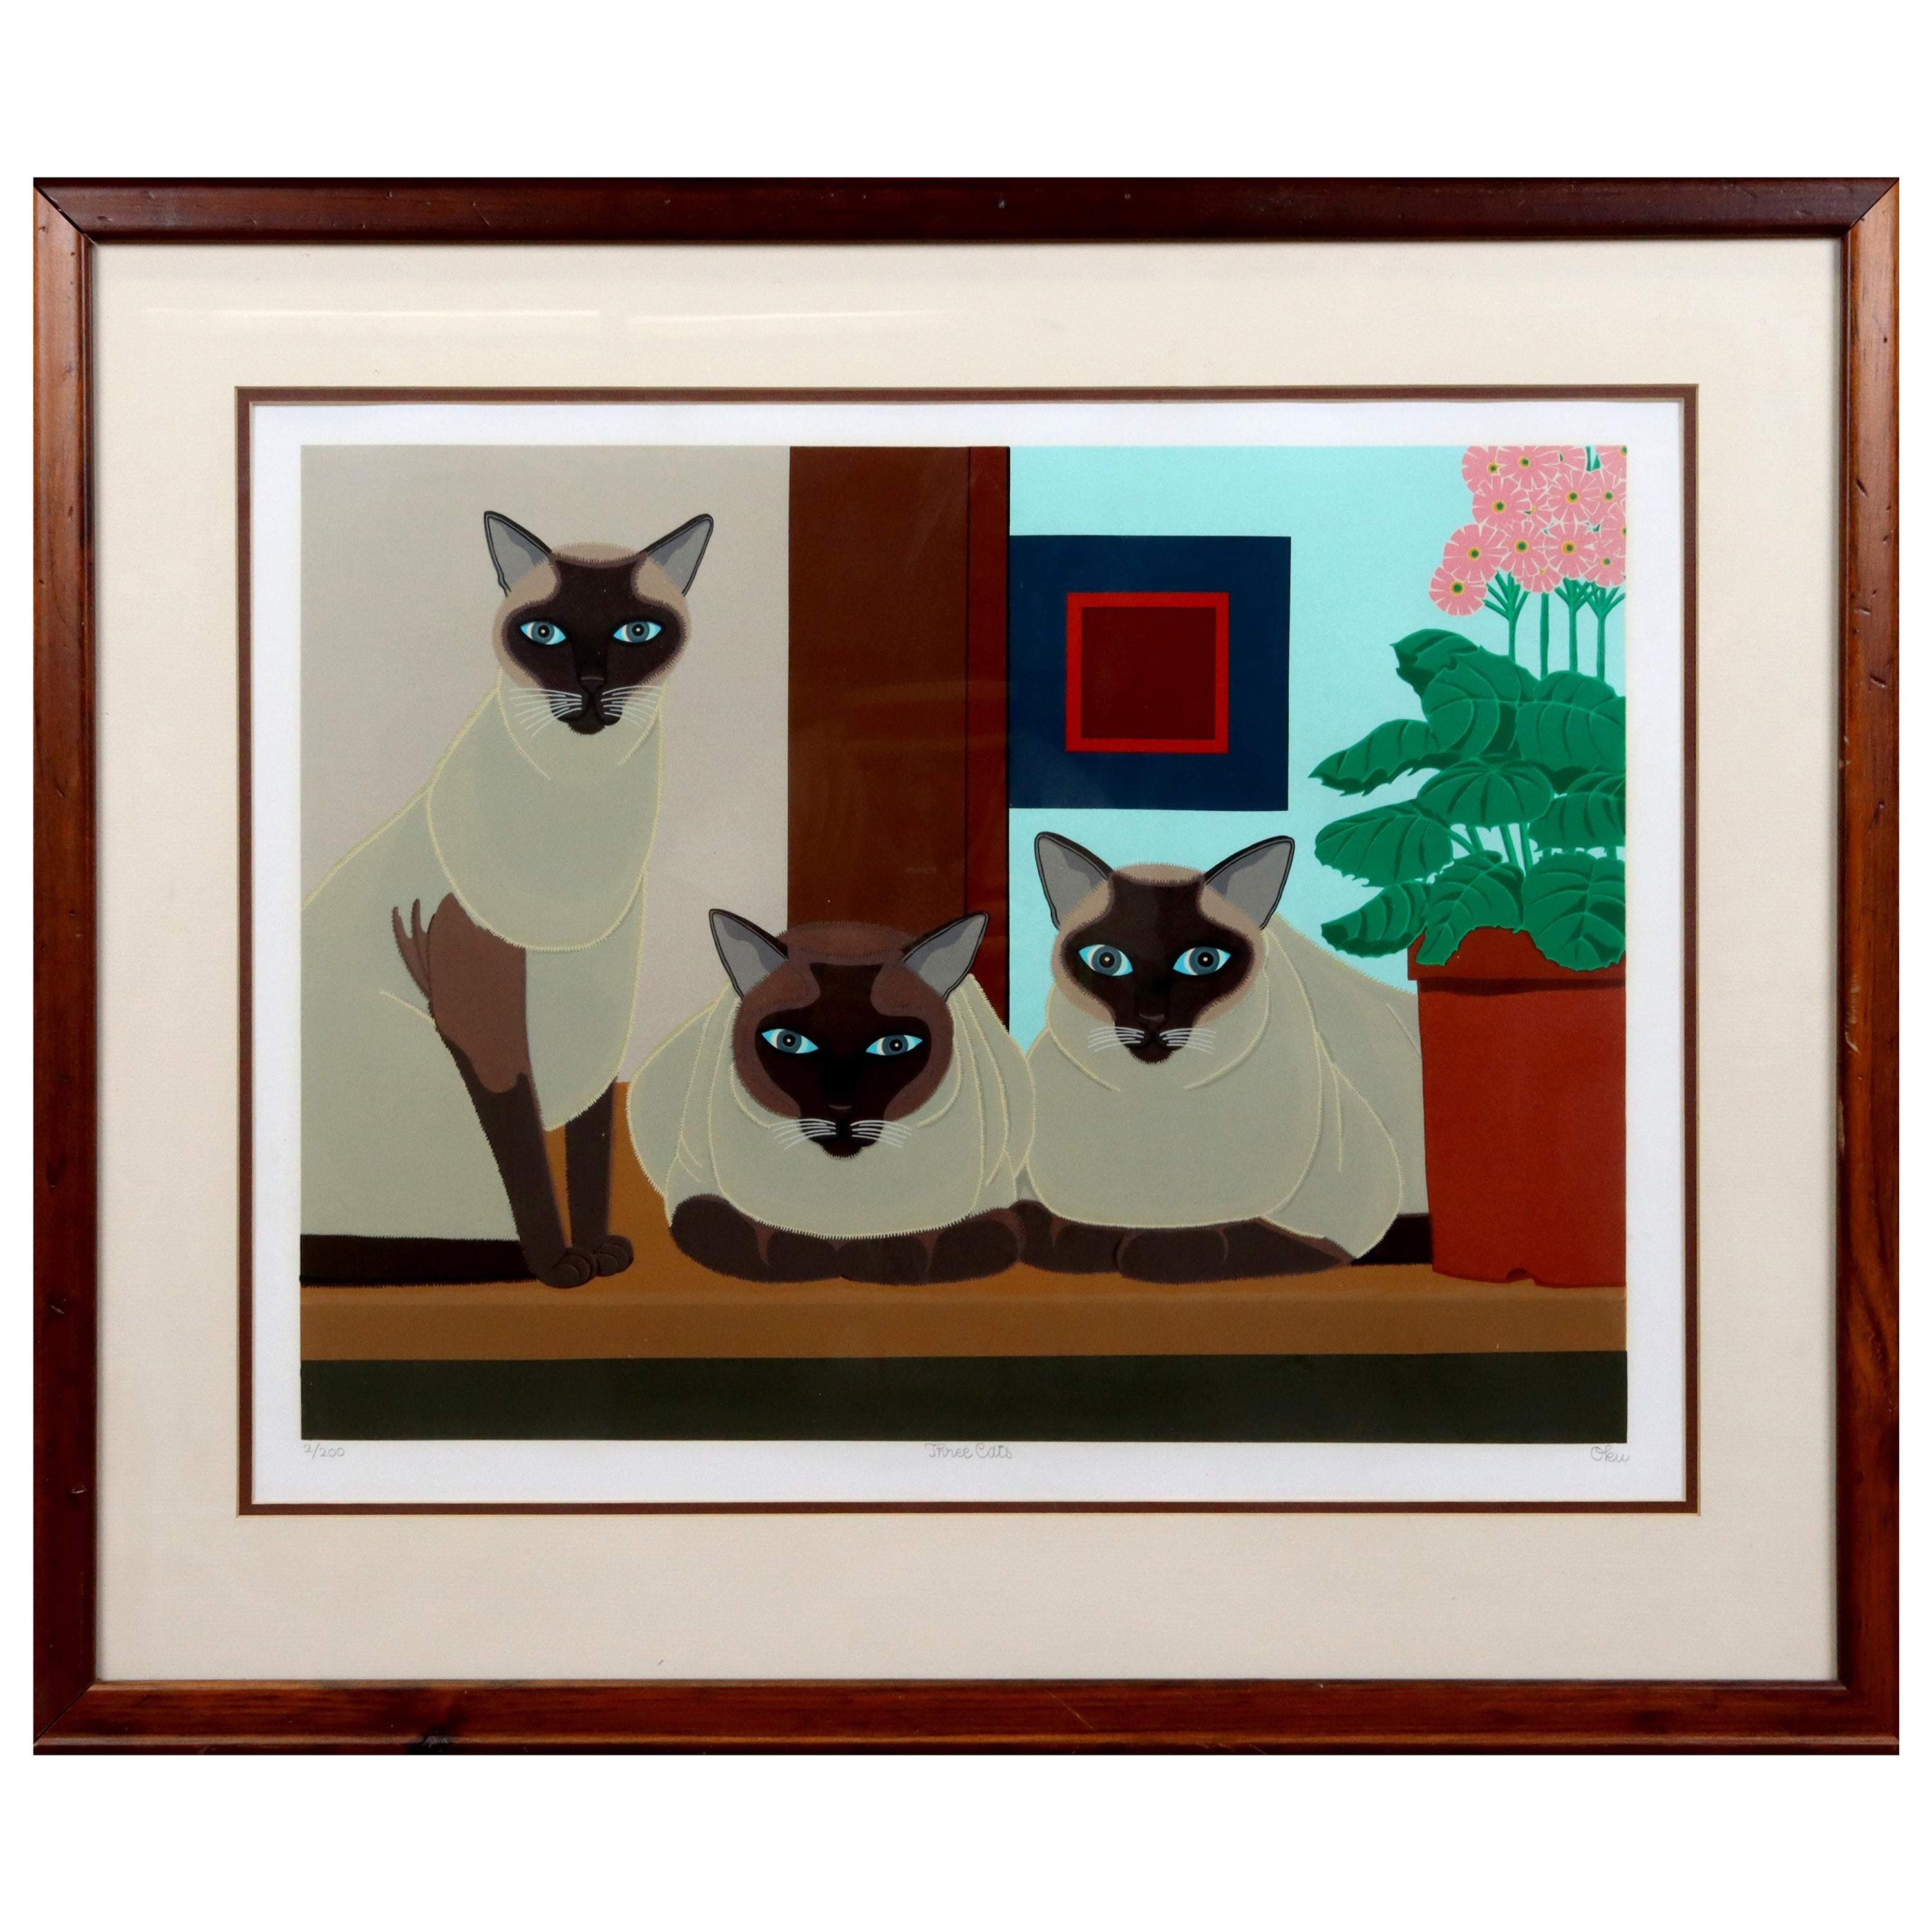 Vintage "Three Cats" Japanese Print by Shigeo Okumura For Sale